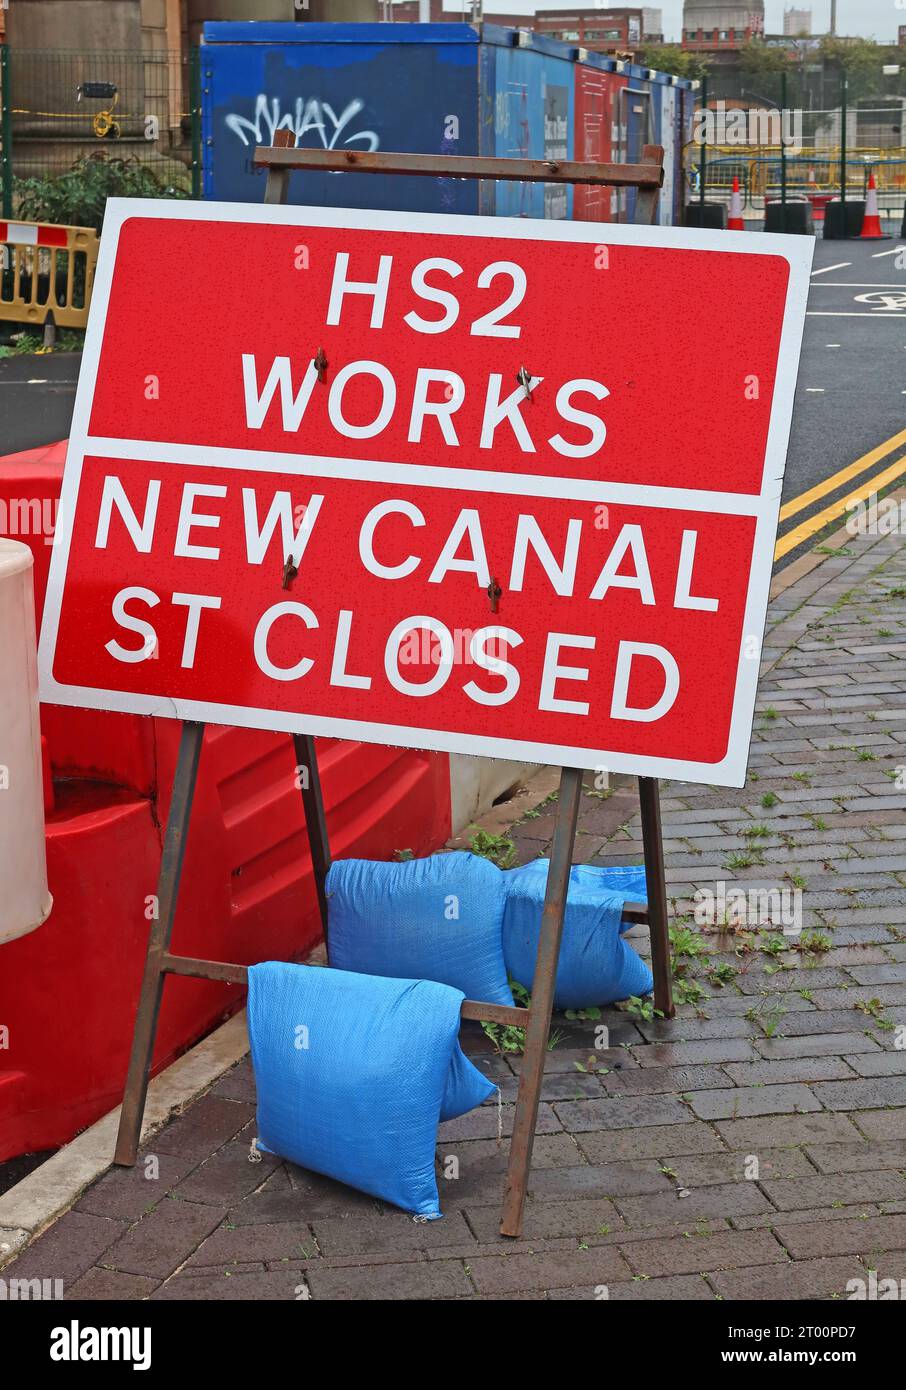 HS2 high speed works sign at New Canal St, Curzon St, railway station, Central Birmingham, West Midlands, England, UK, B4 7XG Stock Photo